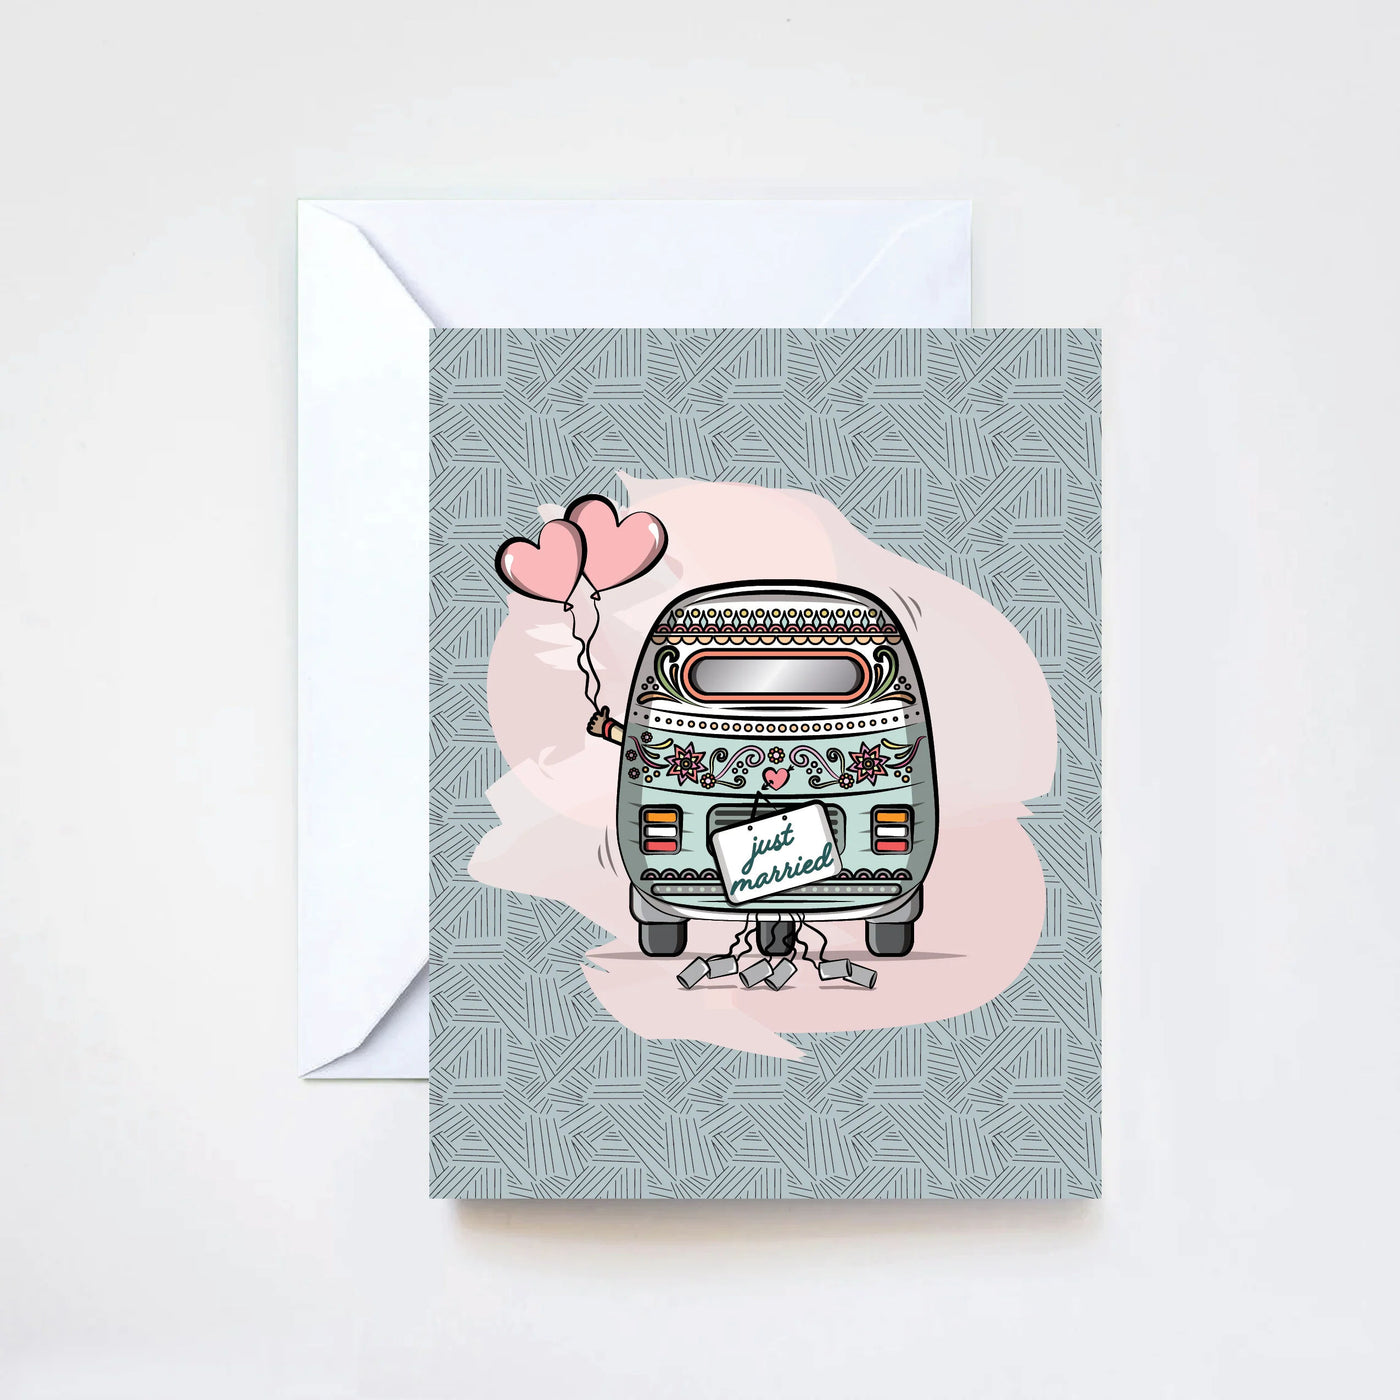 Just Married card by The Cute Pista